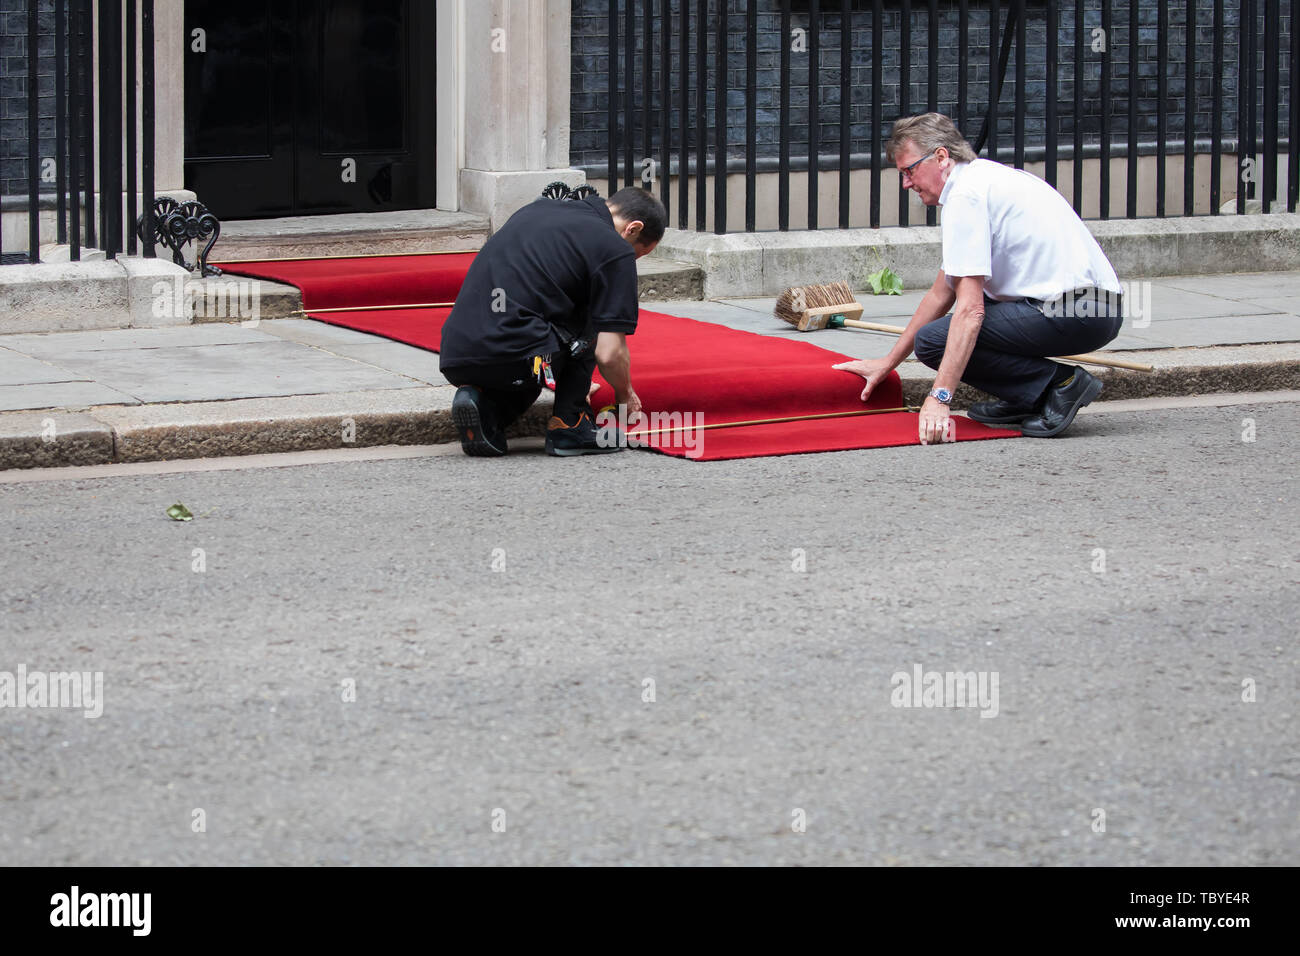 London, UK. 4th June, 2019. Two men Roll out the red carpet ready for the arrival of President Trump in Downing Street. Credit: Keith Larby/Alamy Live News Stock Photo